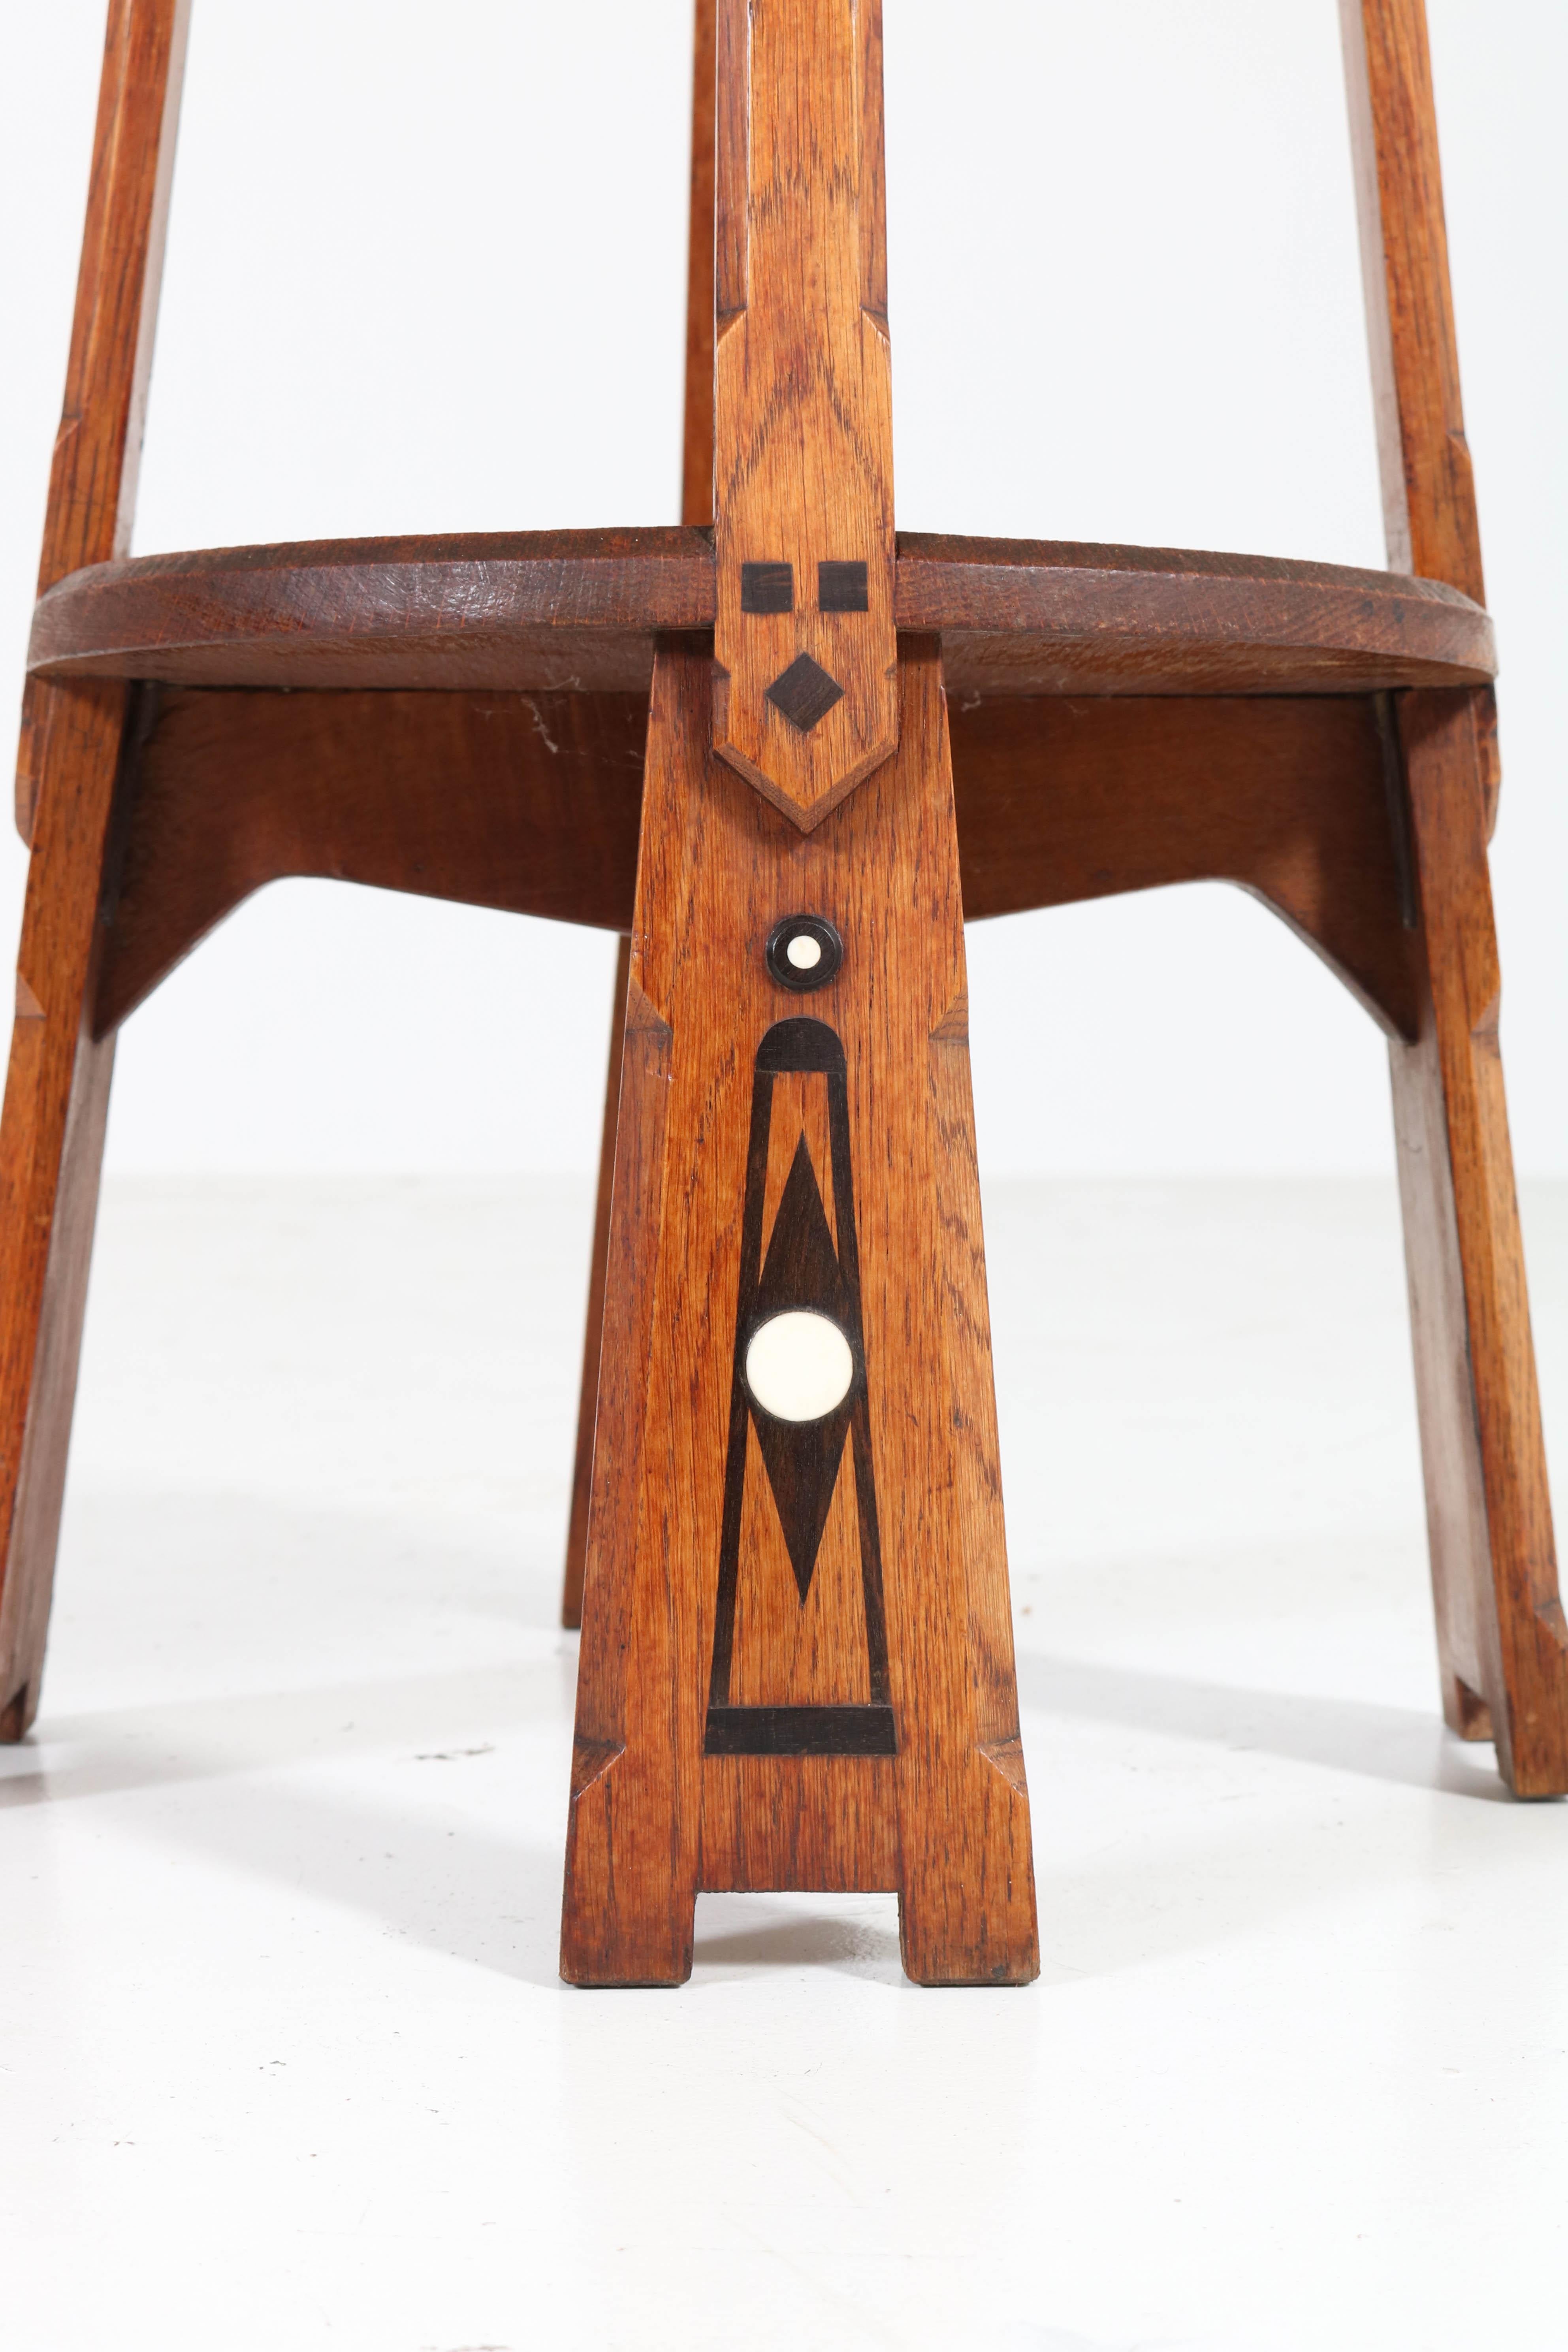 Early 20th Century Dutch Oak Art Nouveau Arts & Crafts Pedestal Table with Inlay, 1900s